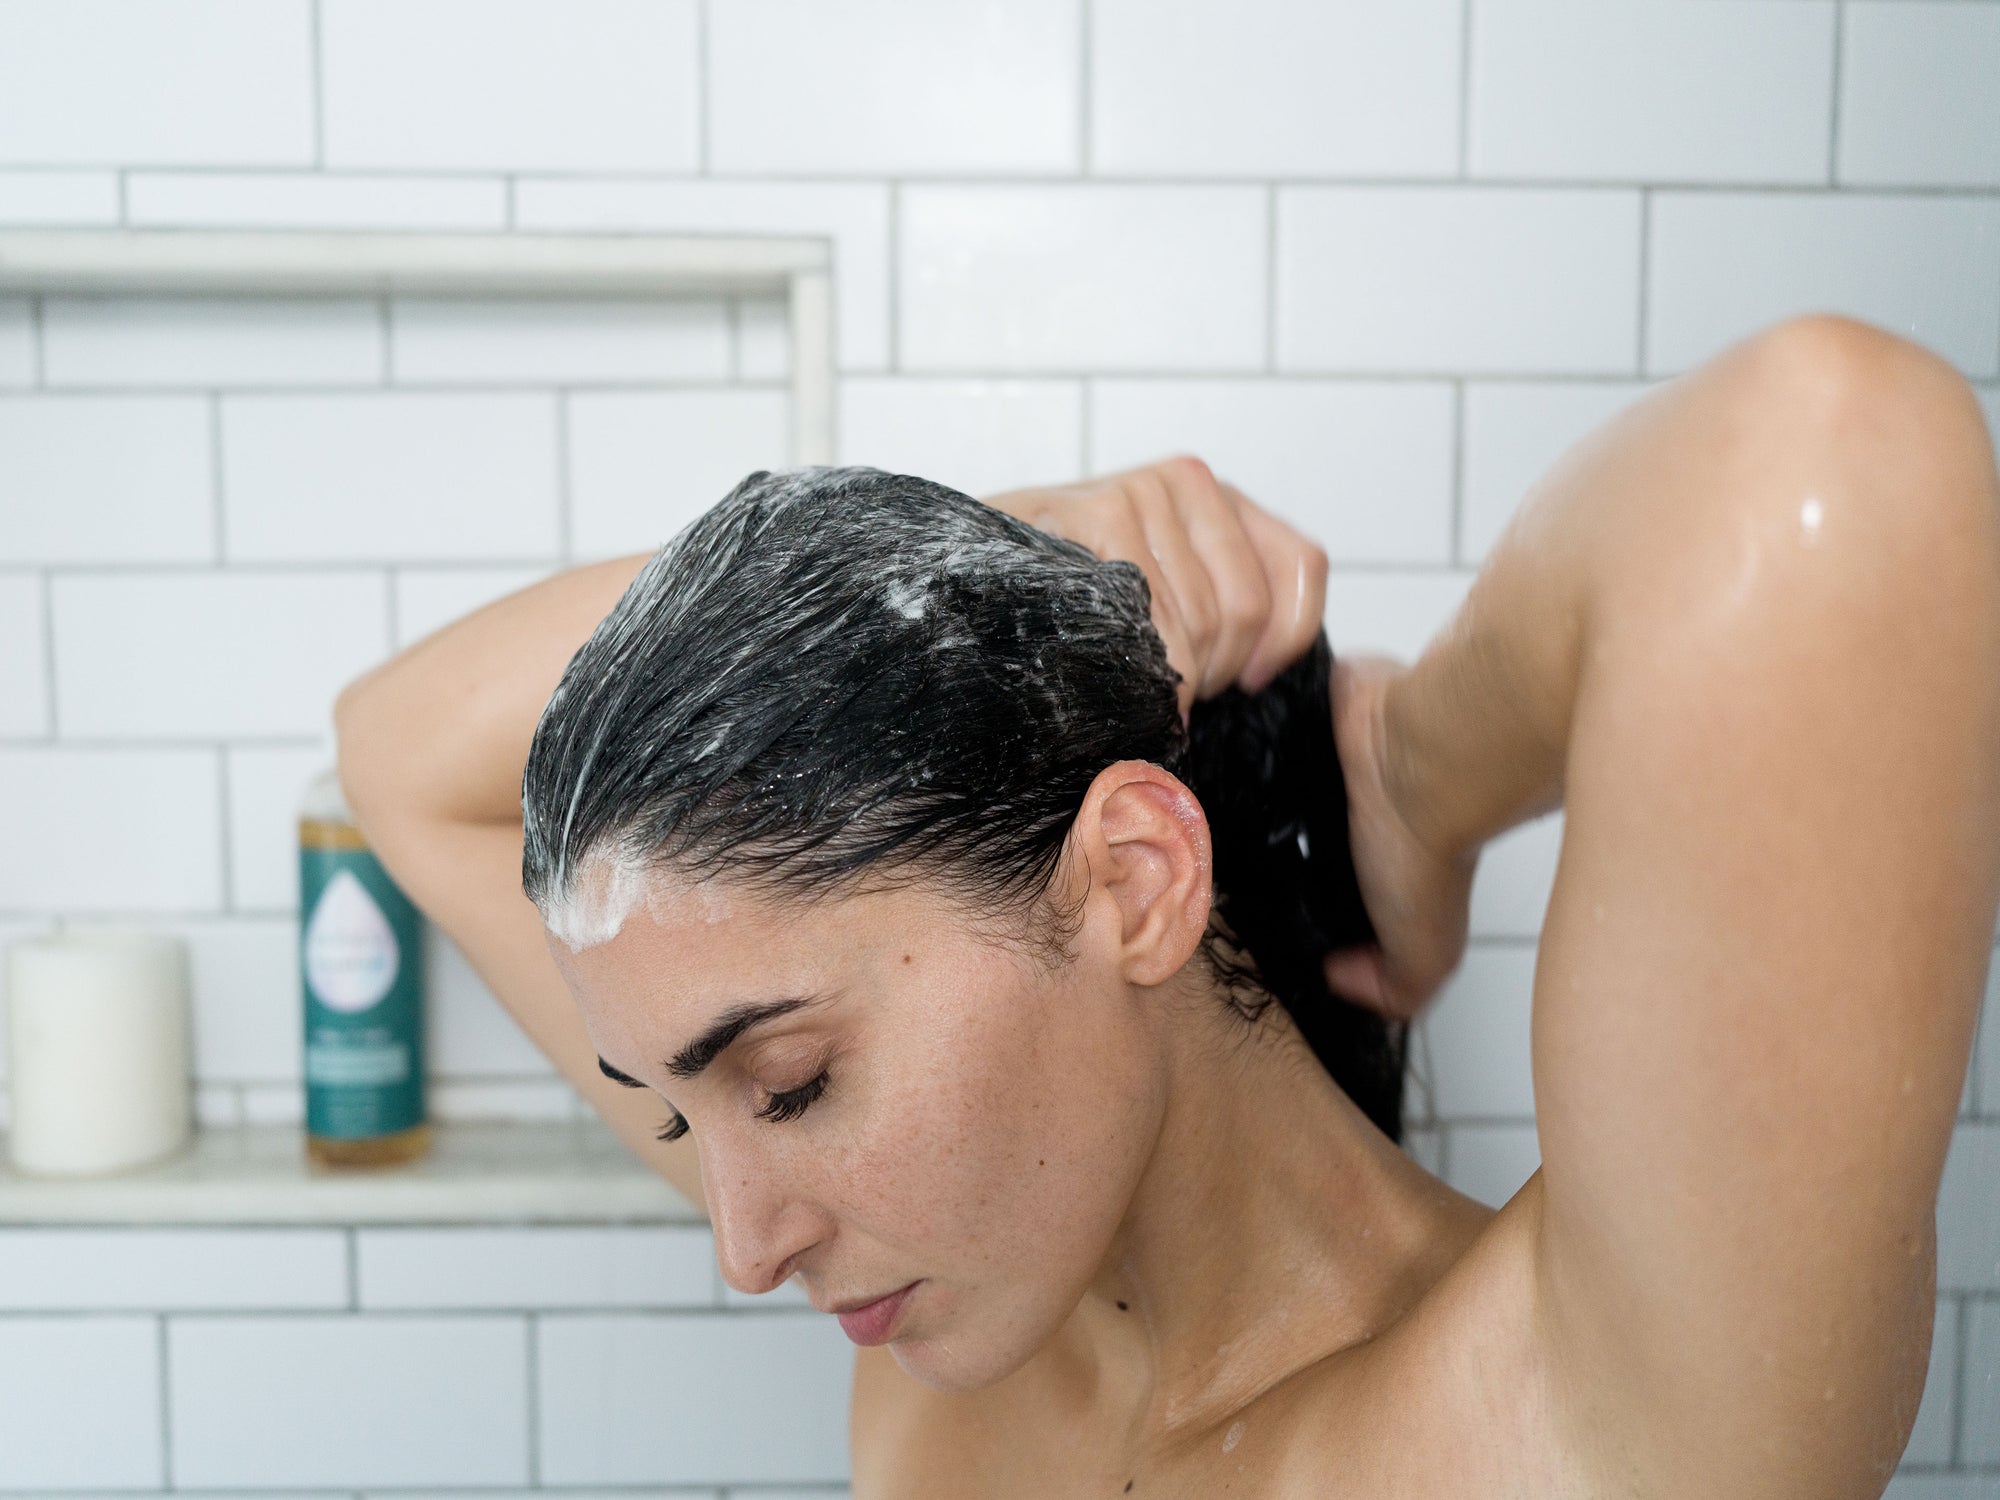 How Much Shampoo Should You Use For Your Hair Type?